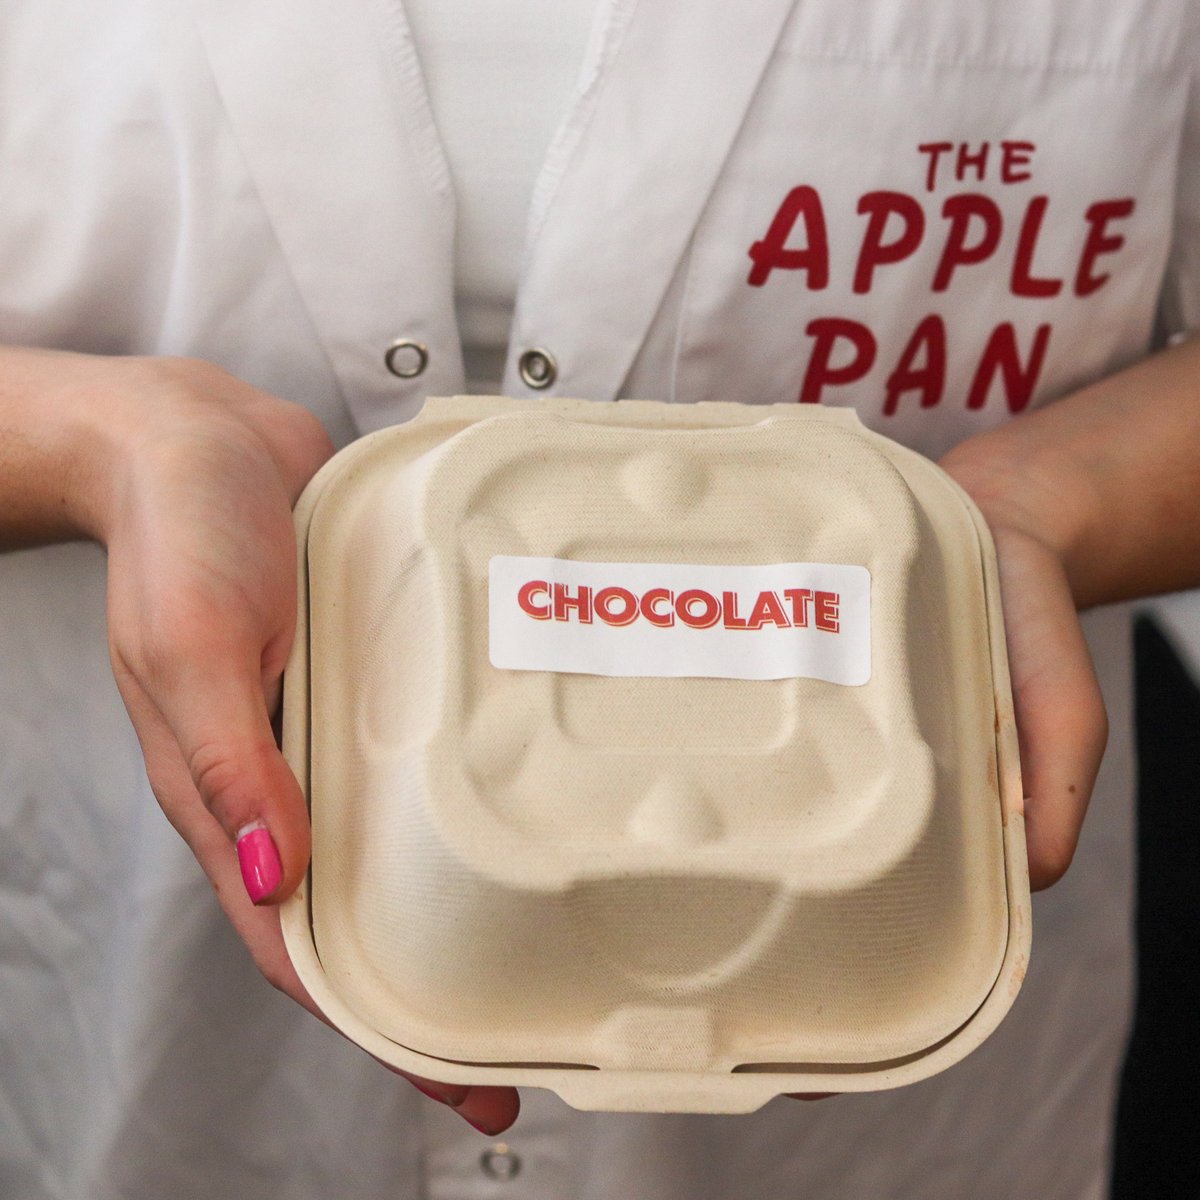 We are firm believers that a balanced diet includes chocolate in both hands! Our Chocolate Cream Pie is back. You want it, we've got it! #applepan #qualityforever #chocolate #chocolatelover #pie #yum #comfort #LA #summer